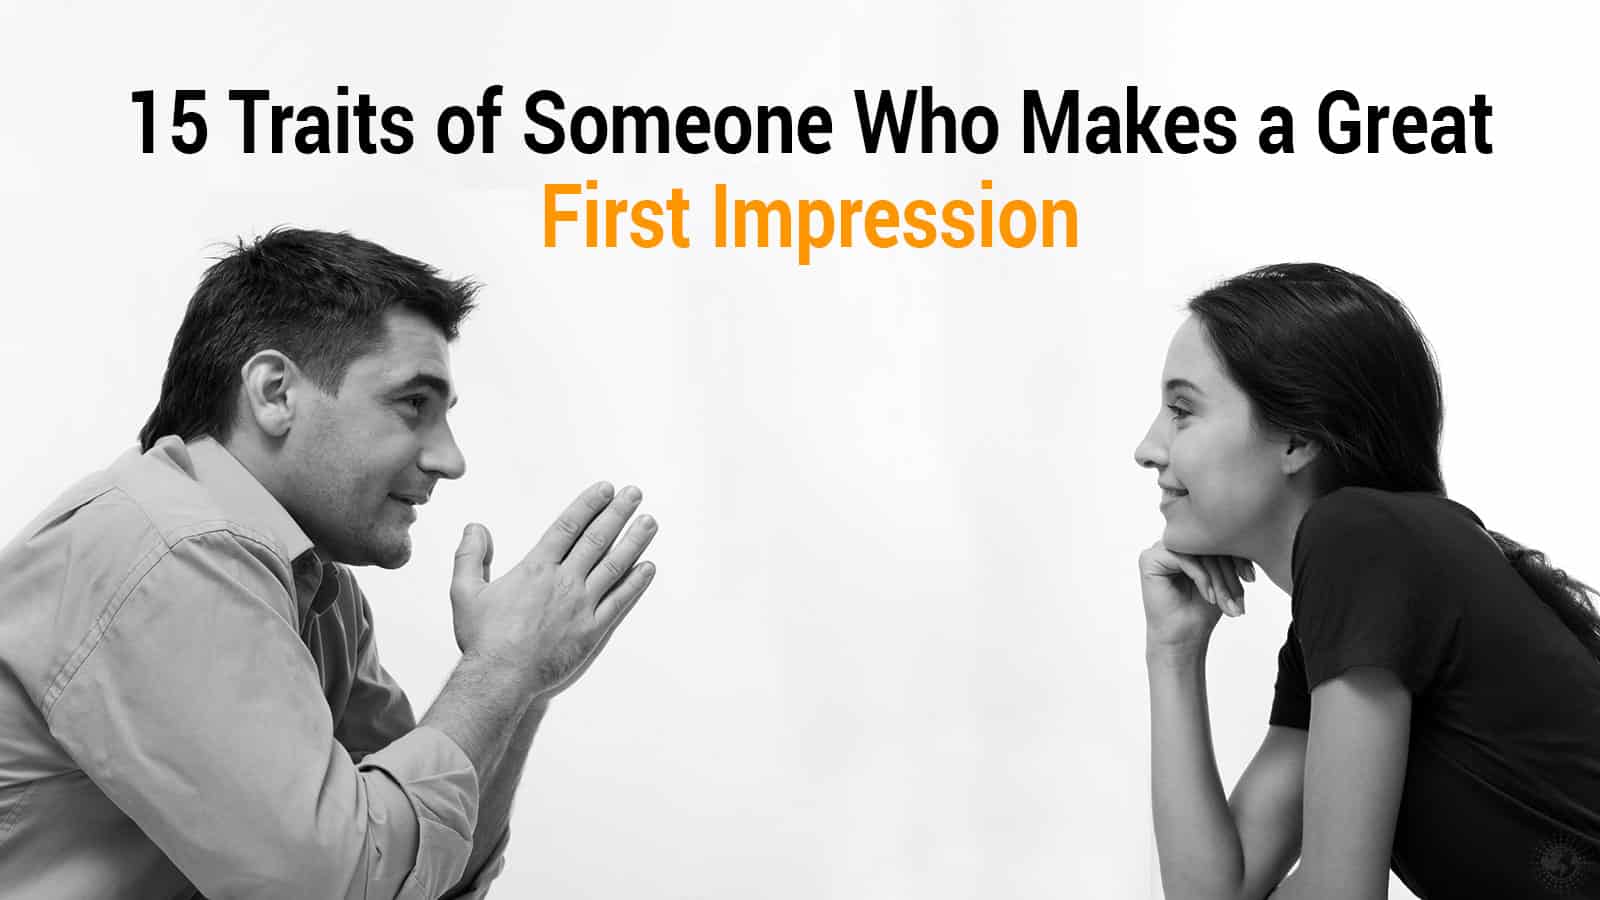 15 Traits of Someone Who Makes a Great First Impression